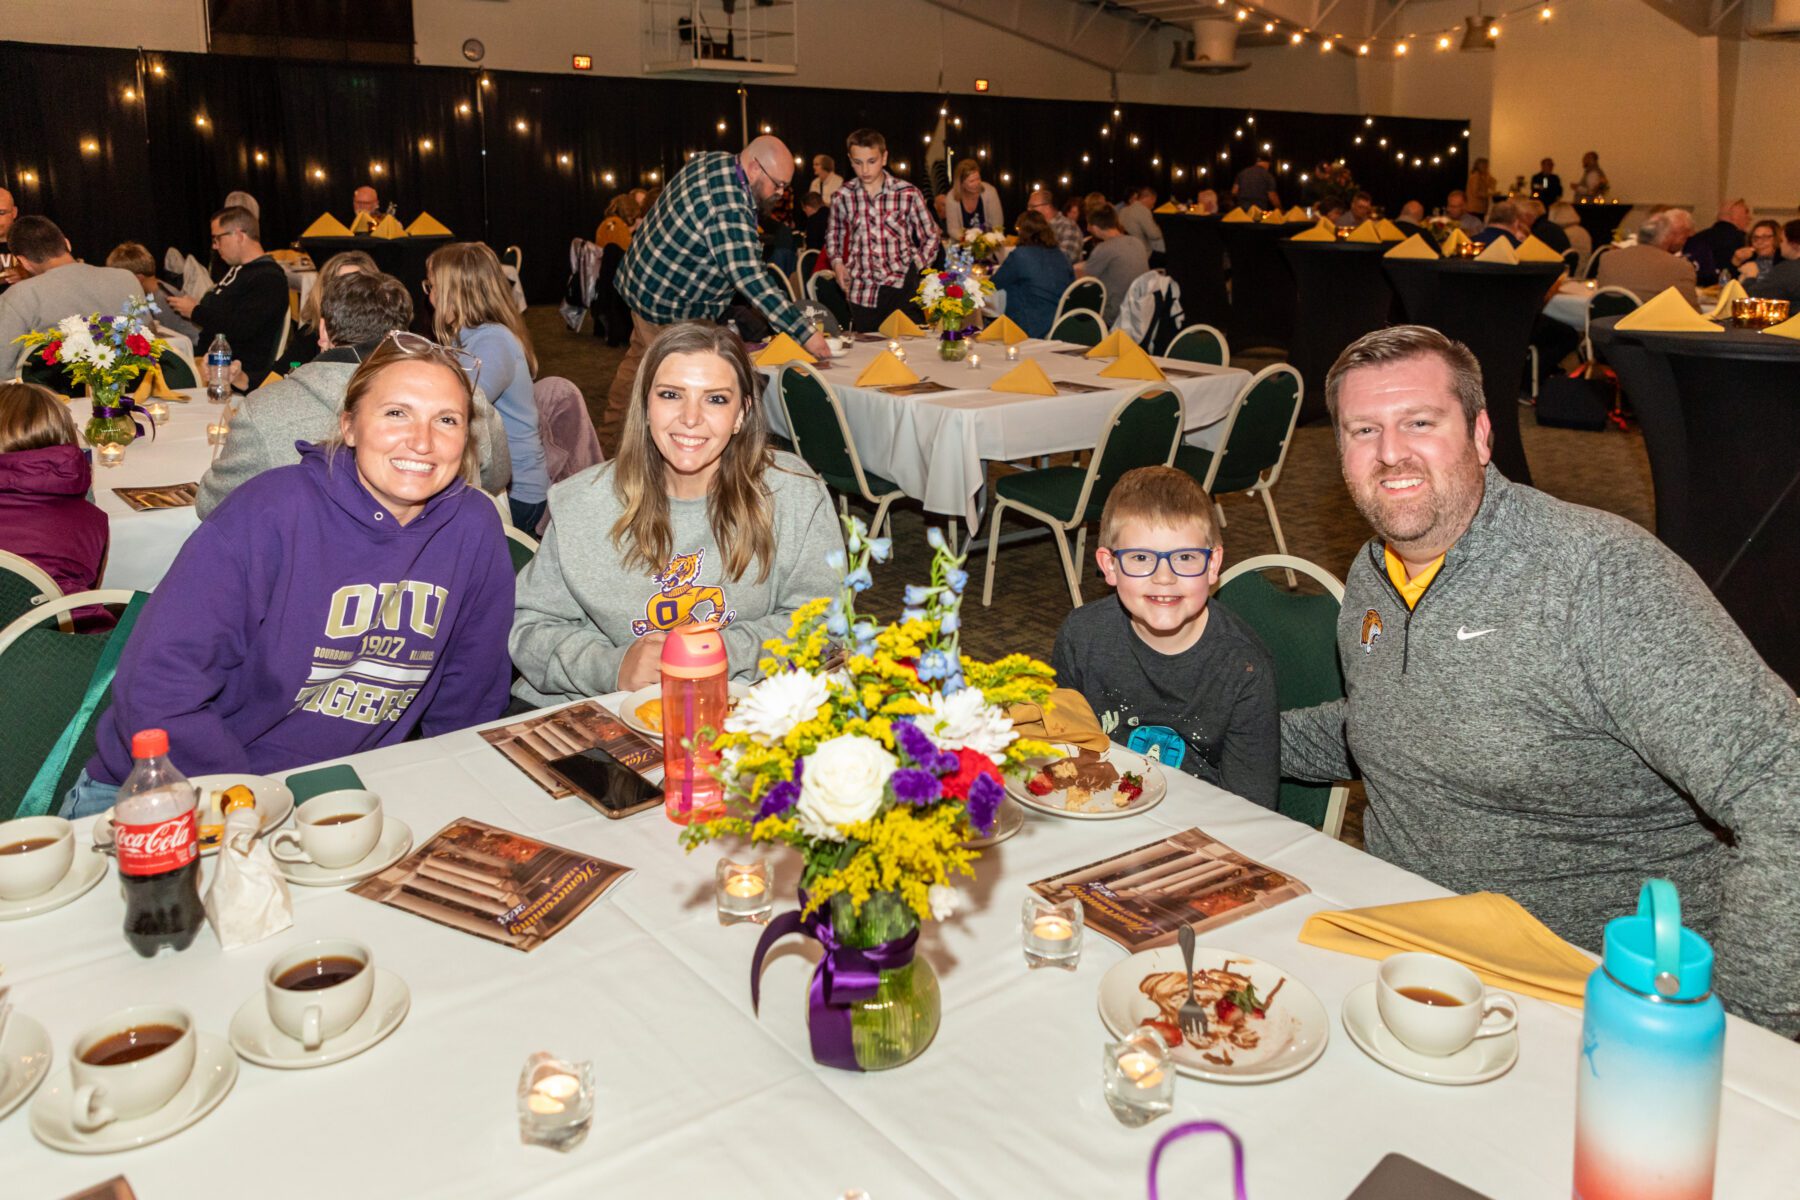 A photo of a group who are enjoying their time at the Taste of Olivet experience.